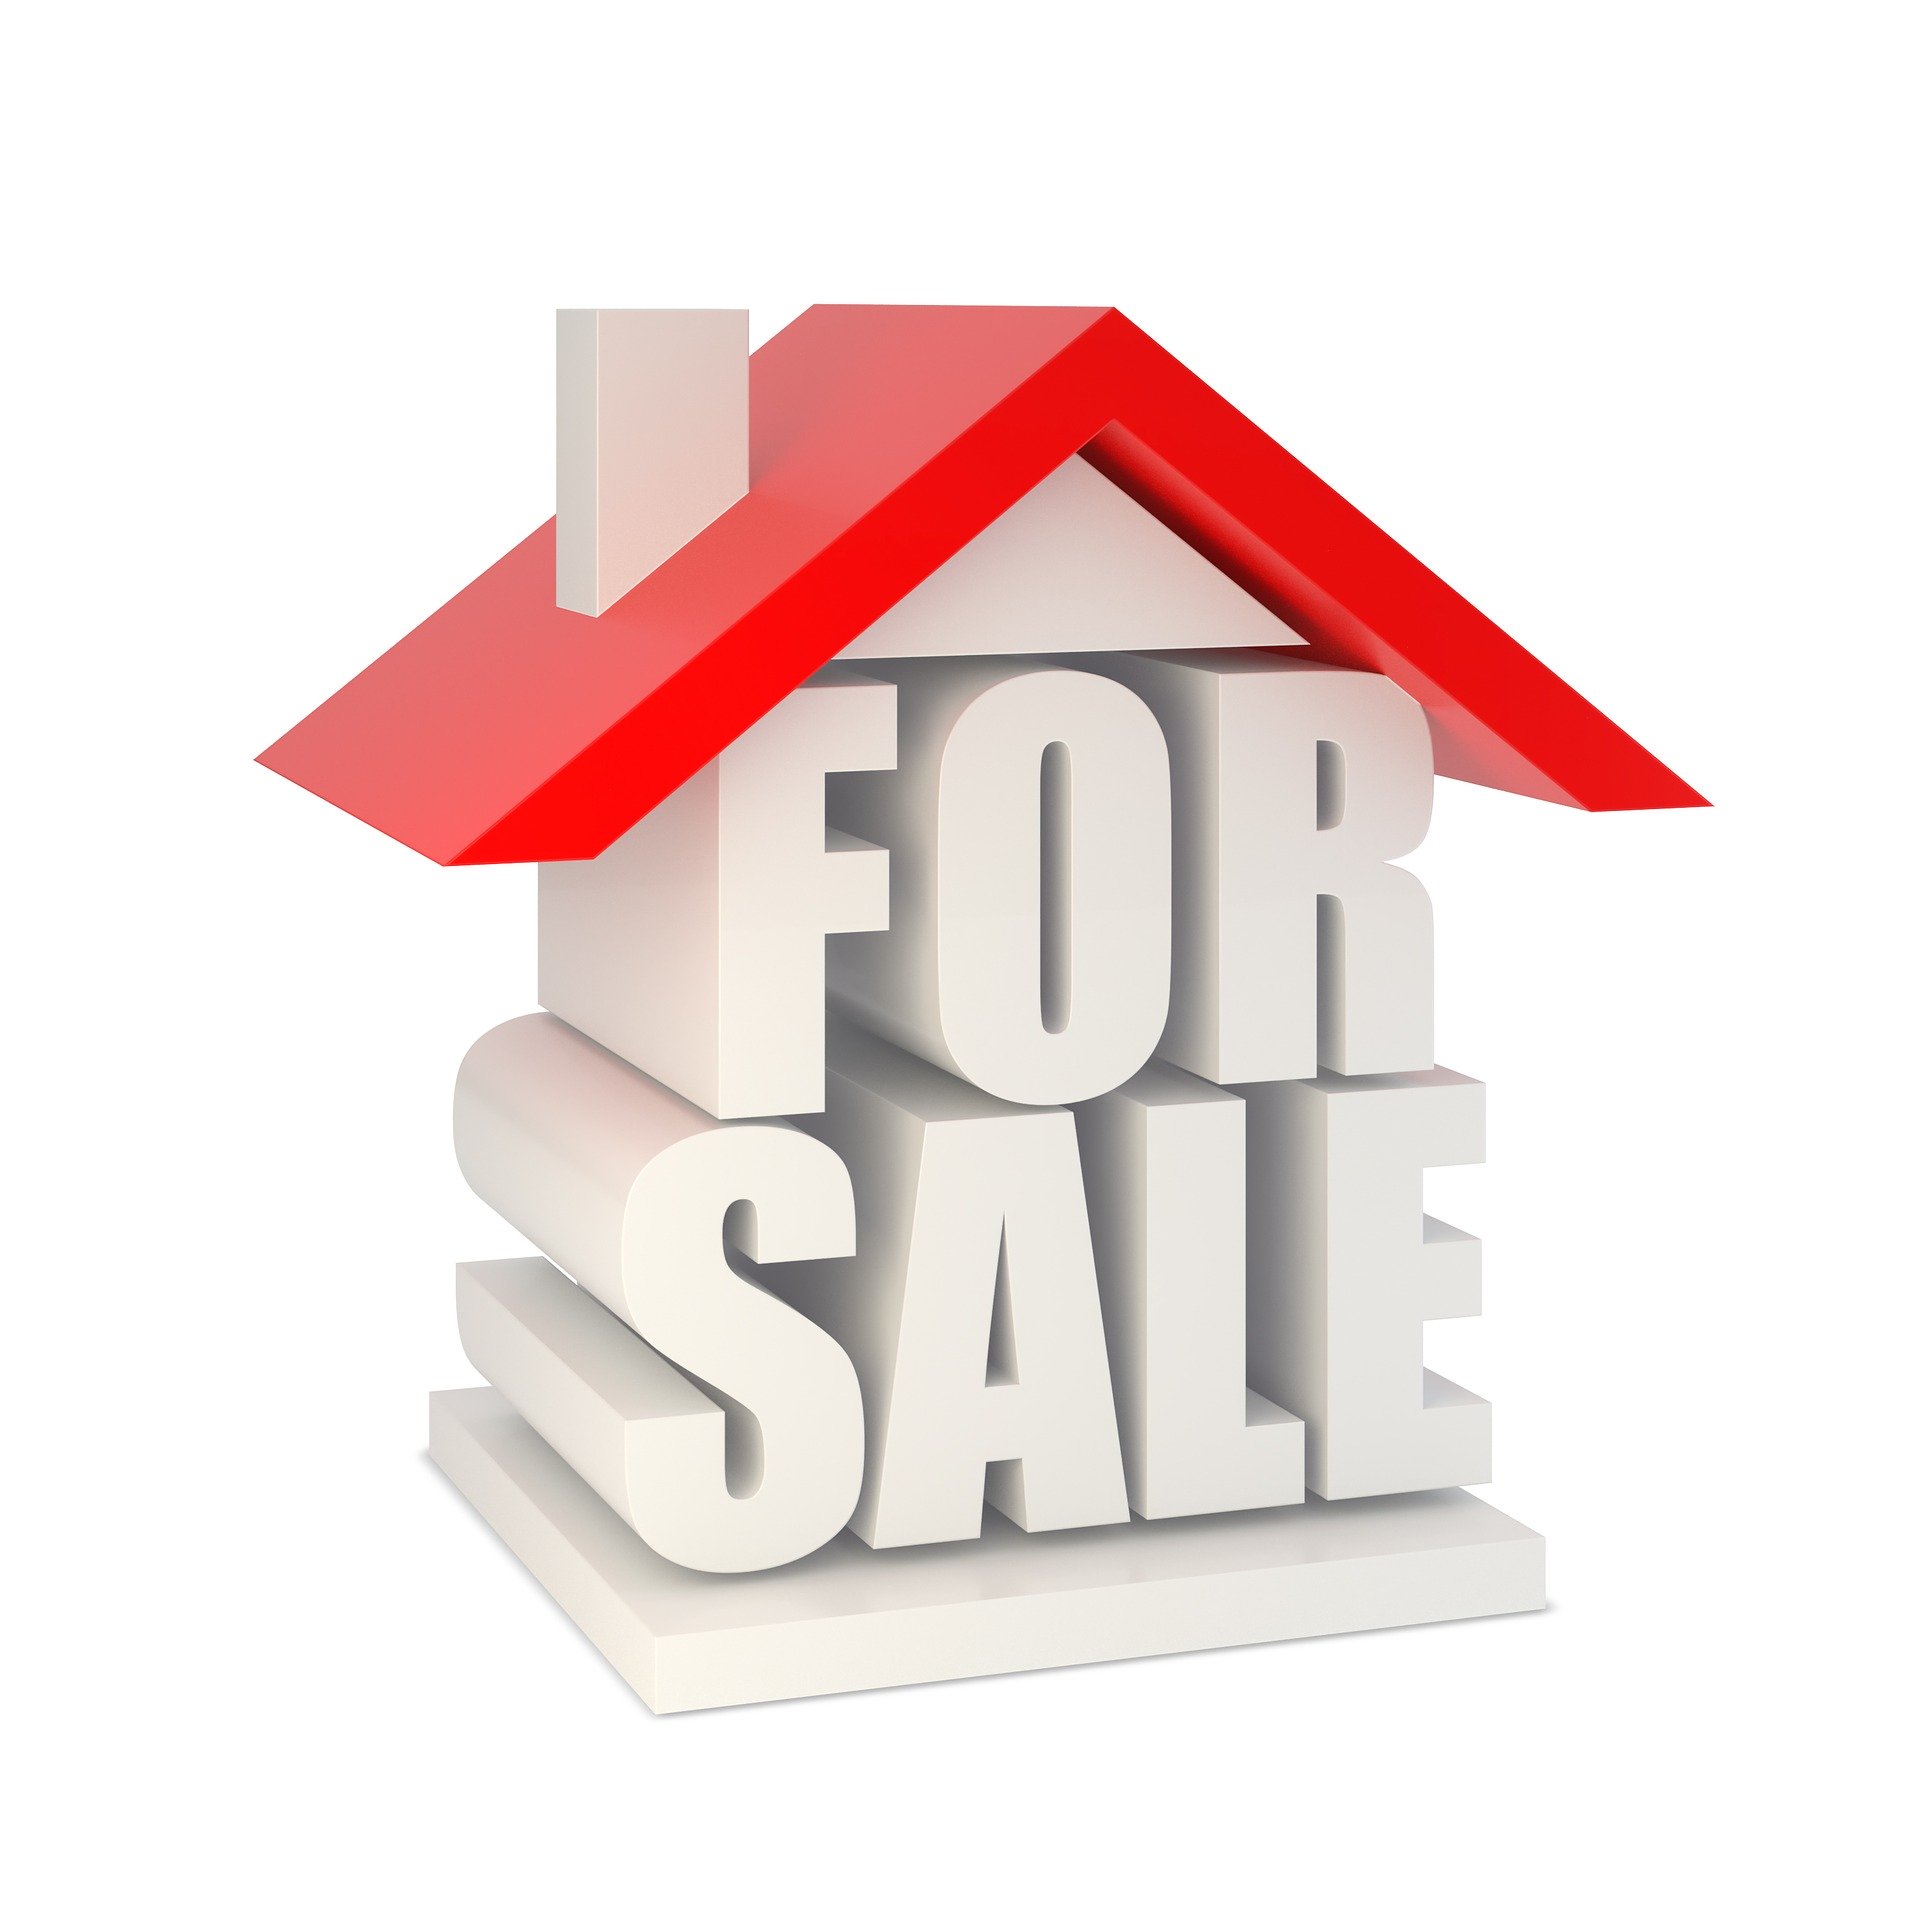 How To Advertise A Property For Sale In Marbella - futboldeverano